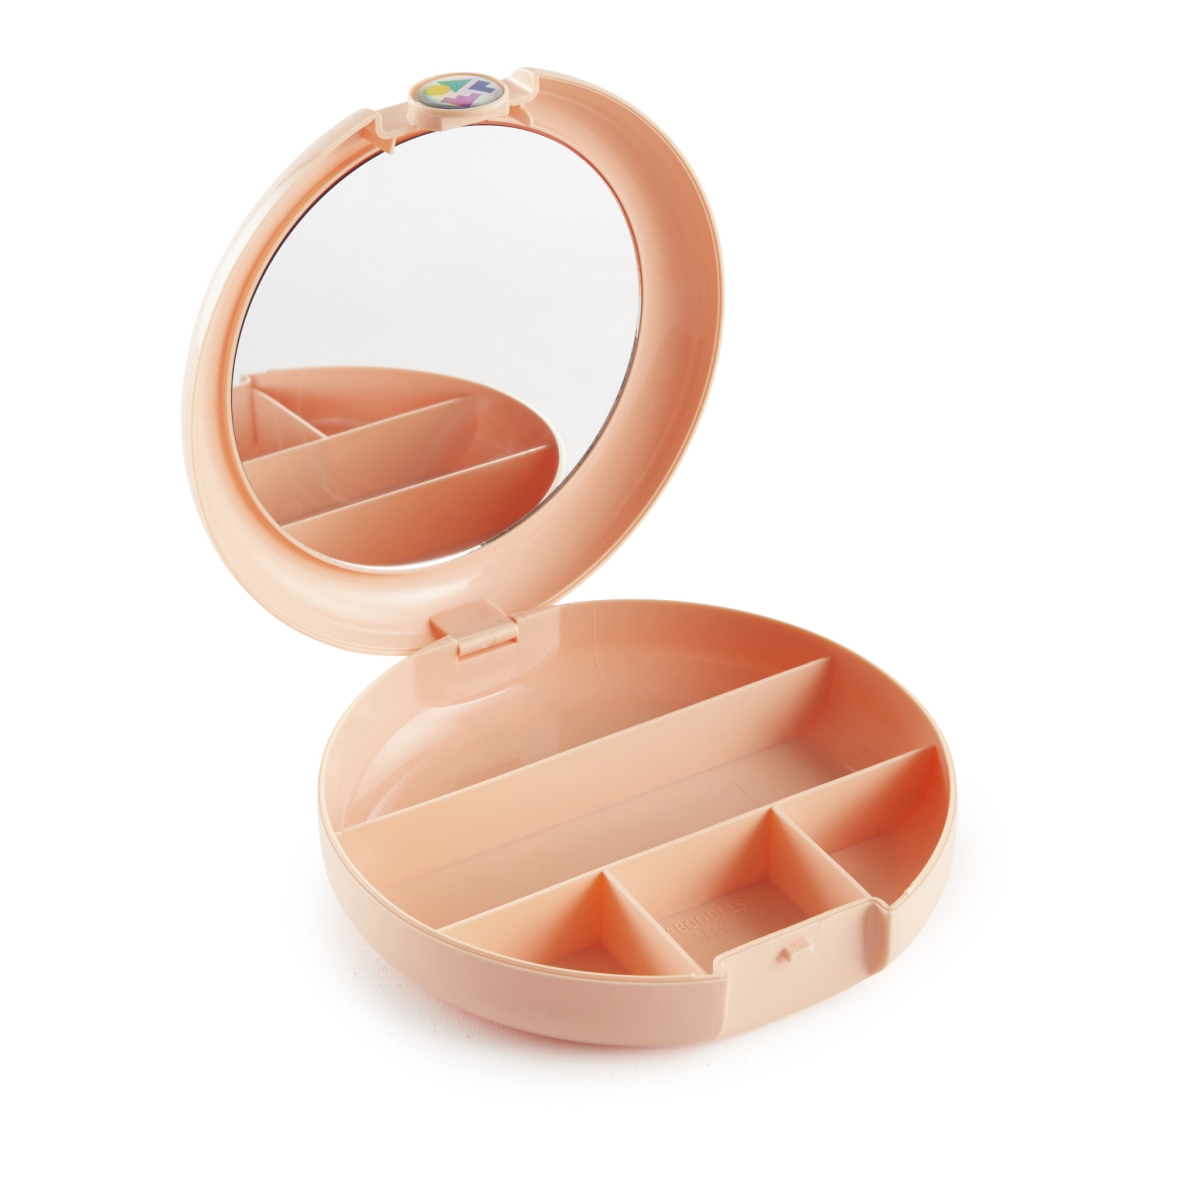 Cab58603a Cosmic Cosmetic Compact, Peach